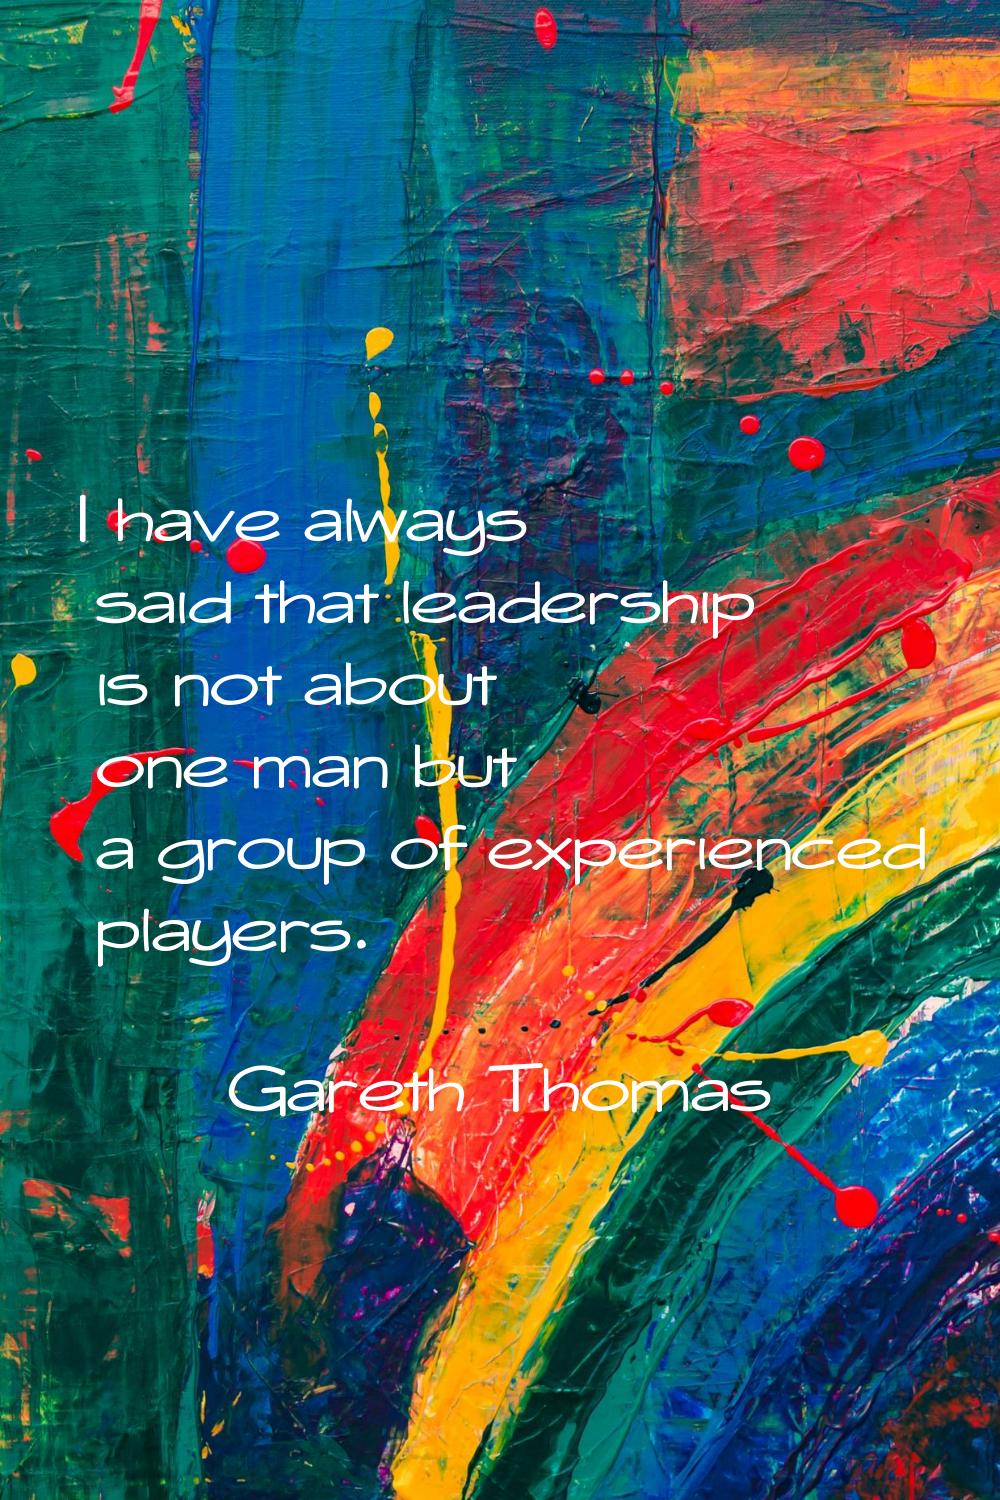 I have always said that leadership is not about one man but a group of experienced players.